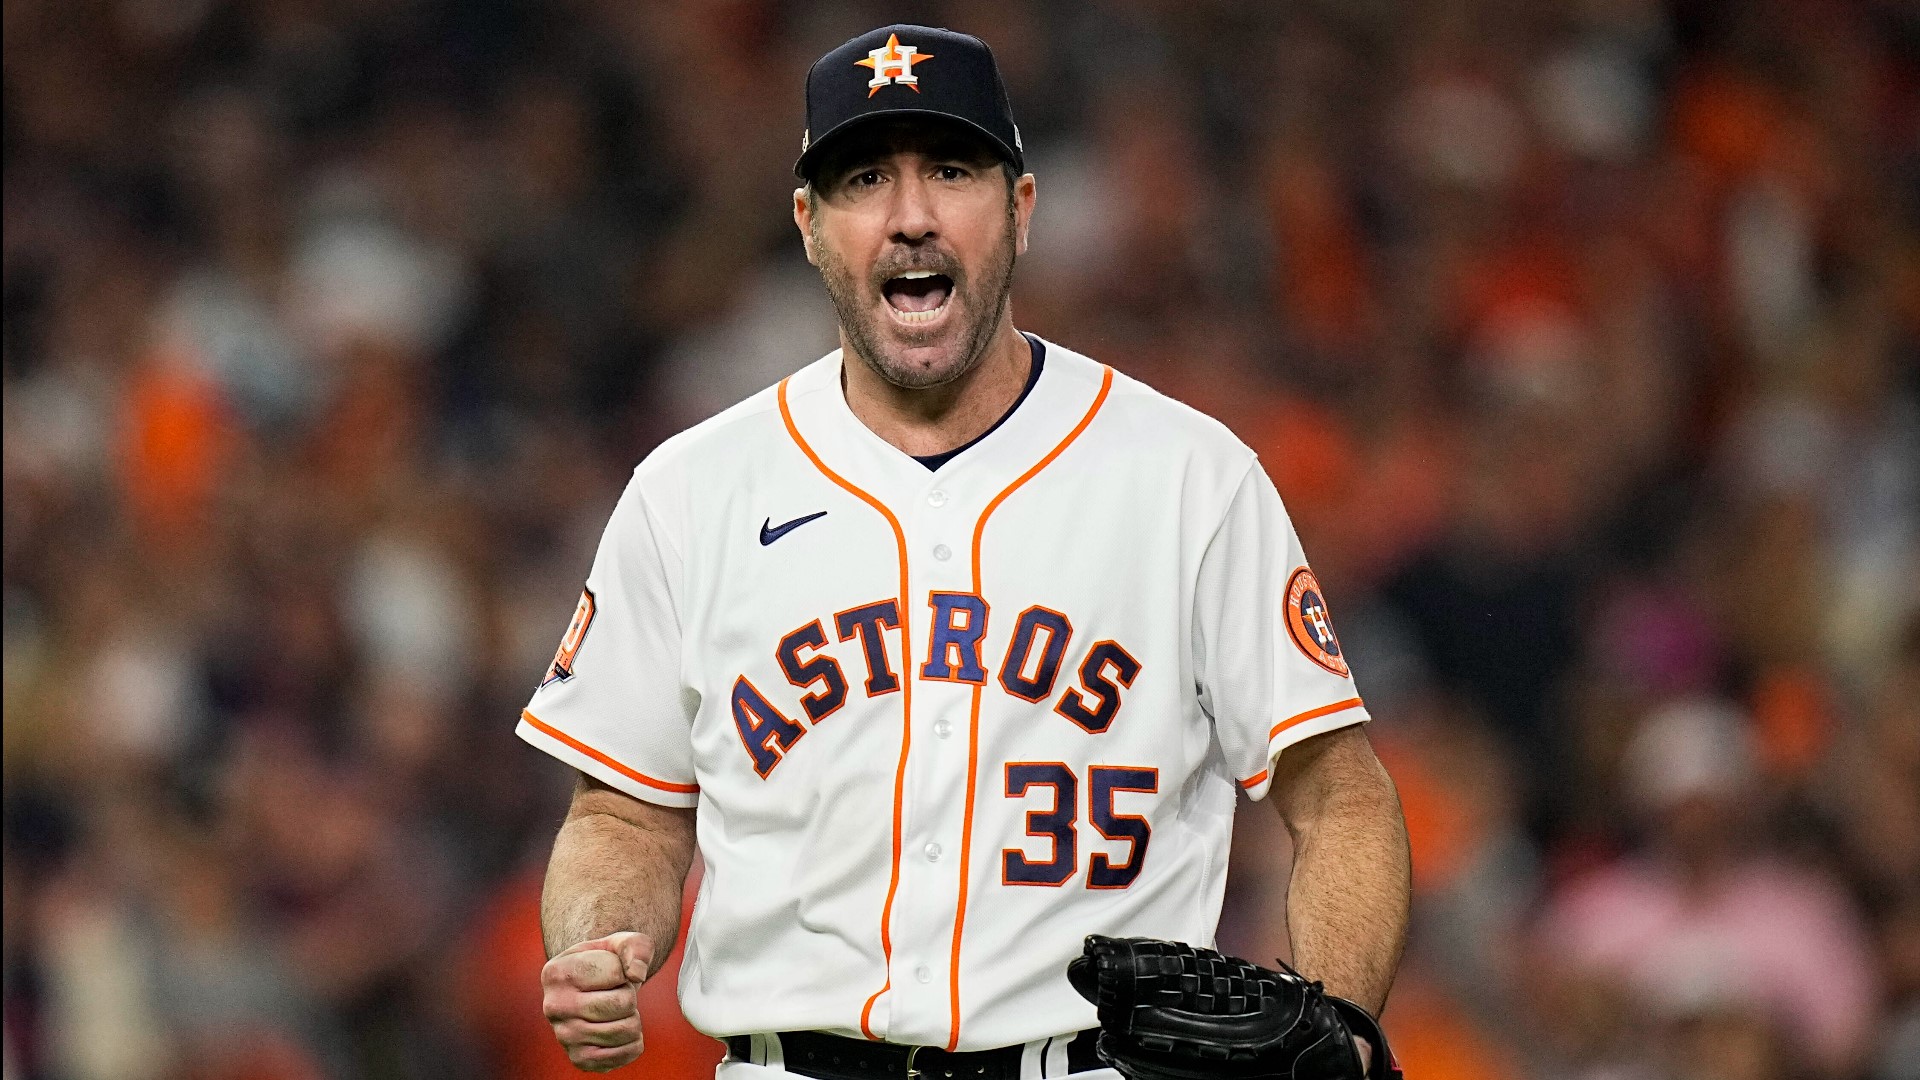 The Houston Astros are up 1-0 in the American League Championship Series after their 4-2 win over New York.